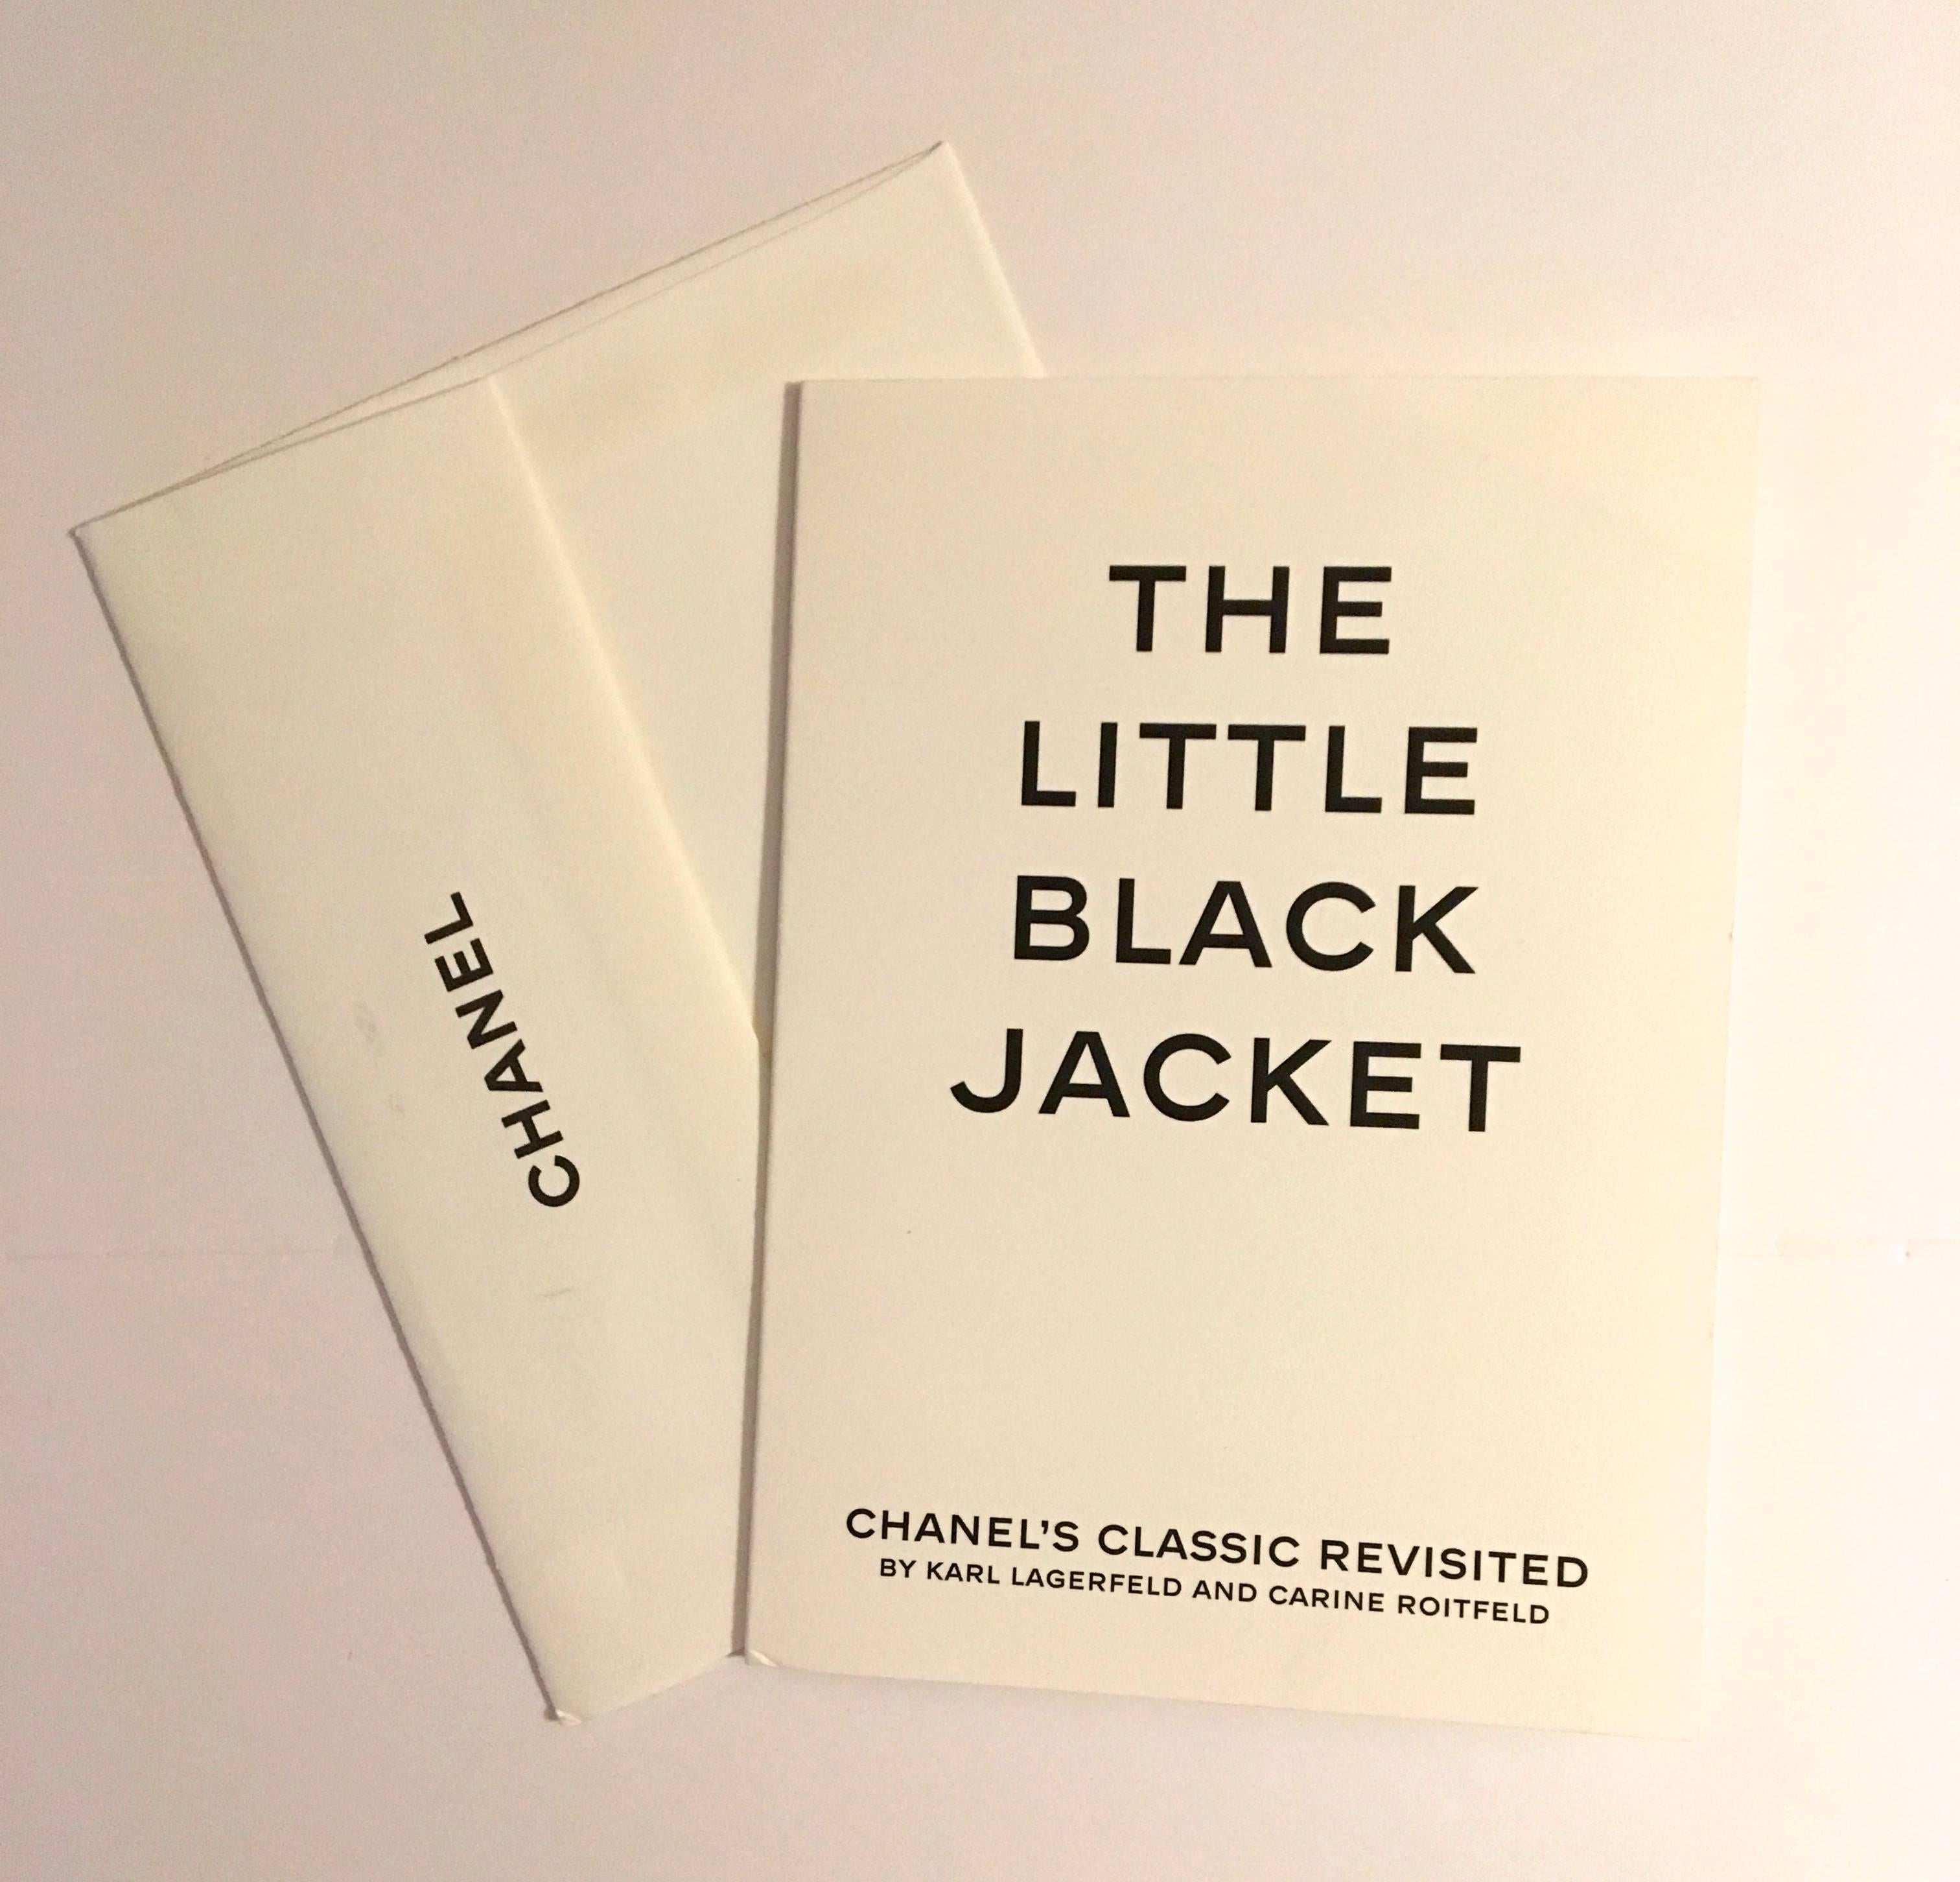 Presented here is a rare copy of the Chanel 'Little Black Jacket' coffee table book. The book celebrates the history of the first introduction of the Chanel black jacket by Coco Chanel and its reinterpretation throughout the years by the label. The